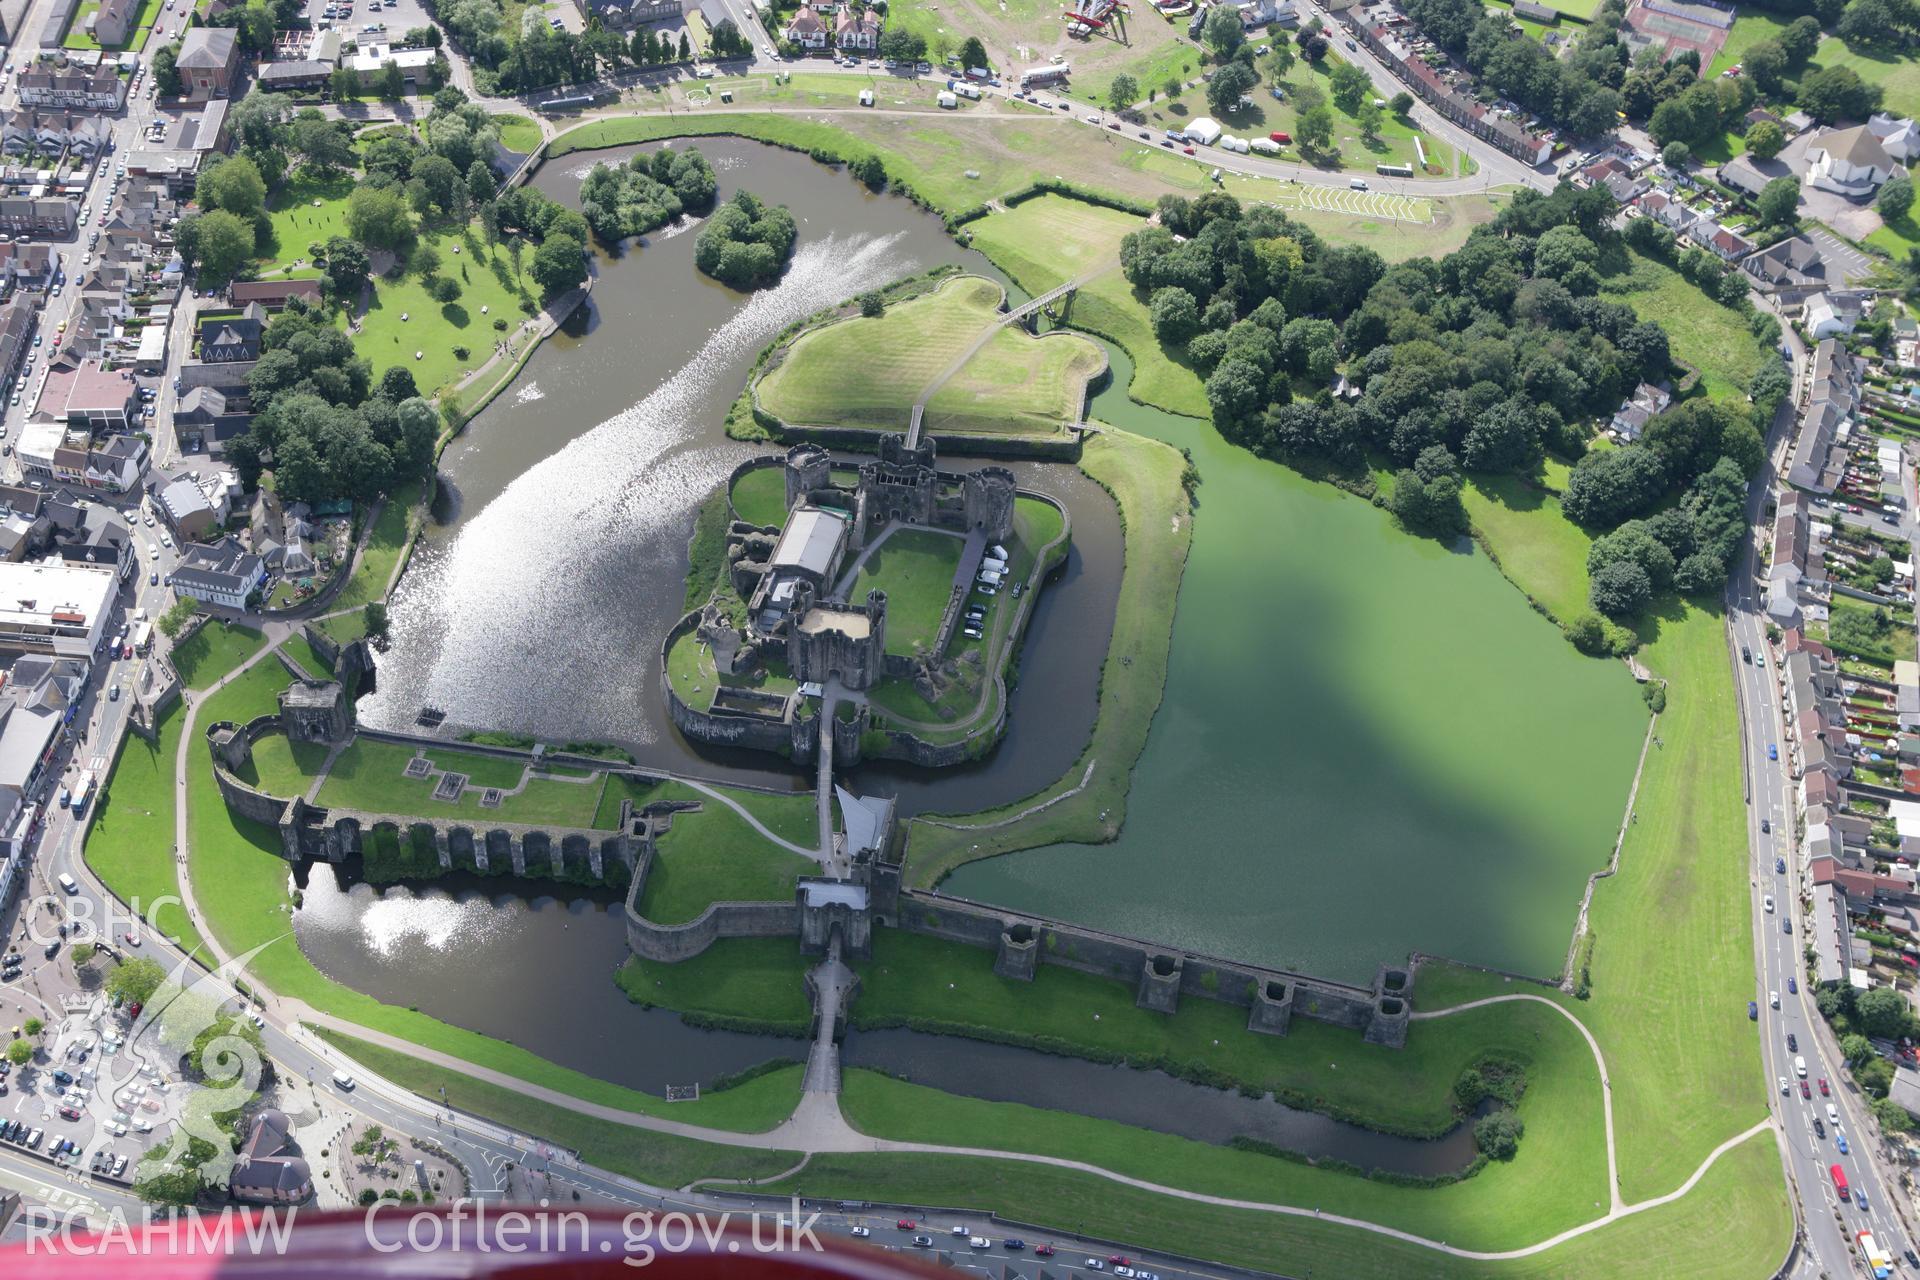 RCAHMW colour oblique aerial photograph of Caerphilly Castle with shadows. Taken on 30 July 2007 by Toby Driver